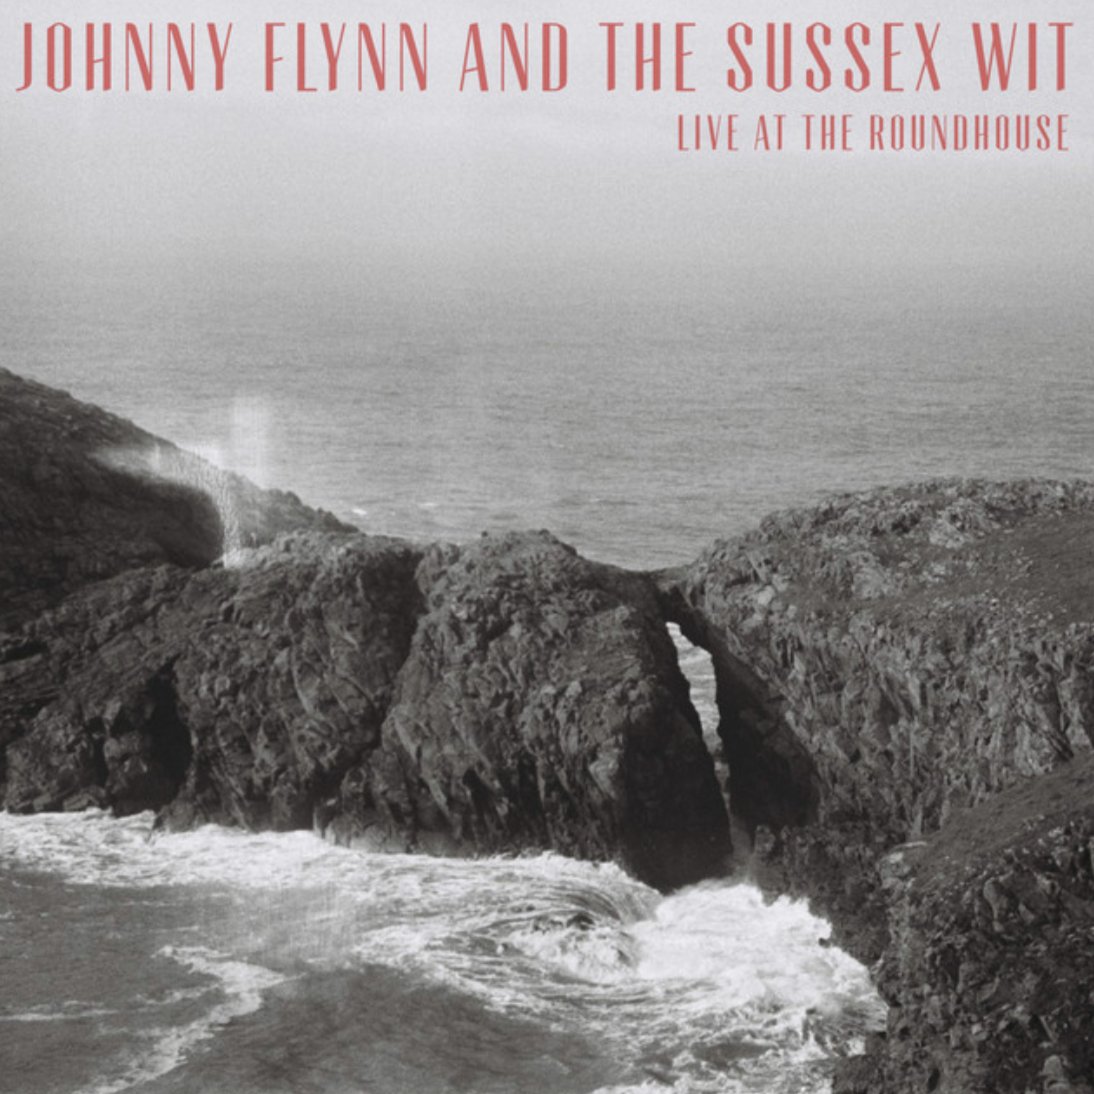 The triple LP of “Johnny Flynn and the Sussex Wit - Live at The Roundhouse” is now back in stock over on Johnny’s store. transgressive.lnk.to/liveattheround…